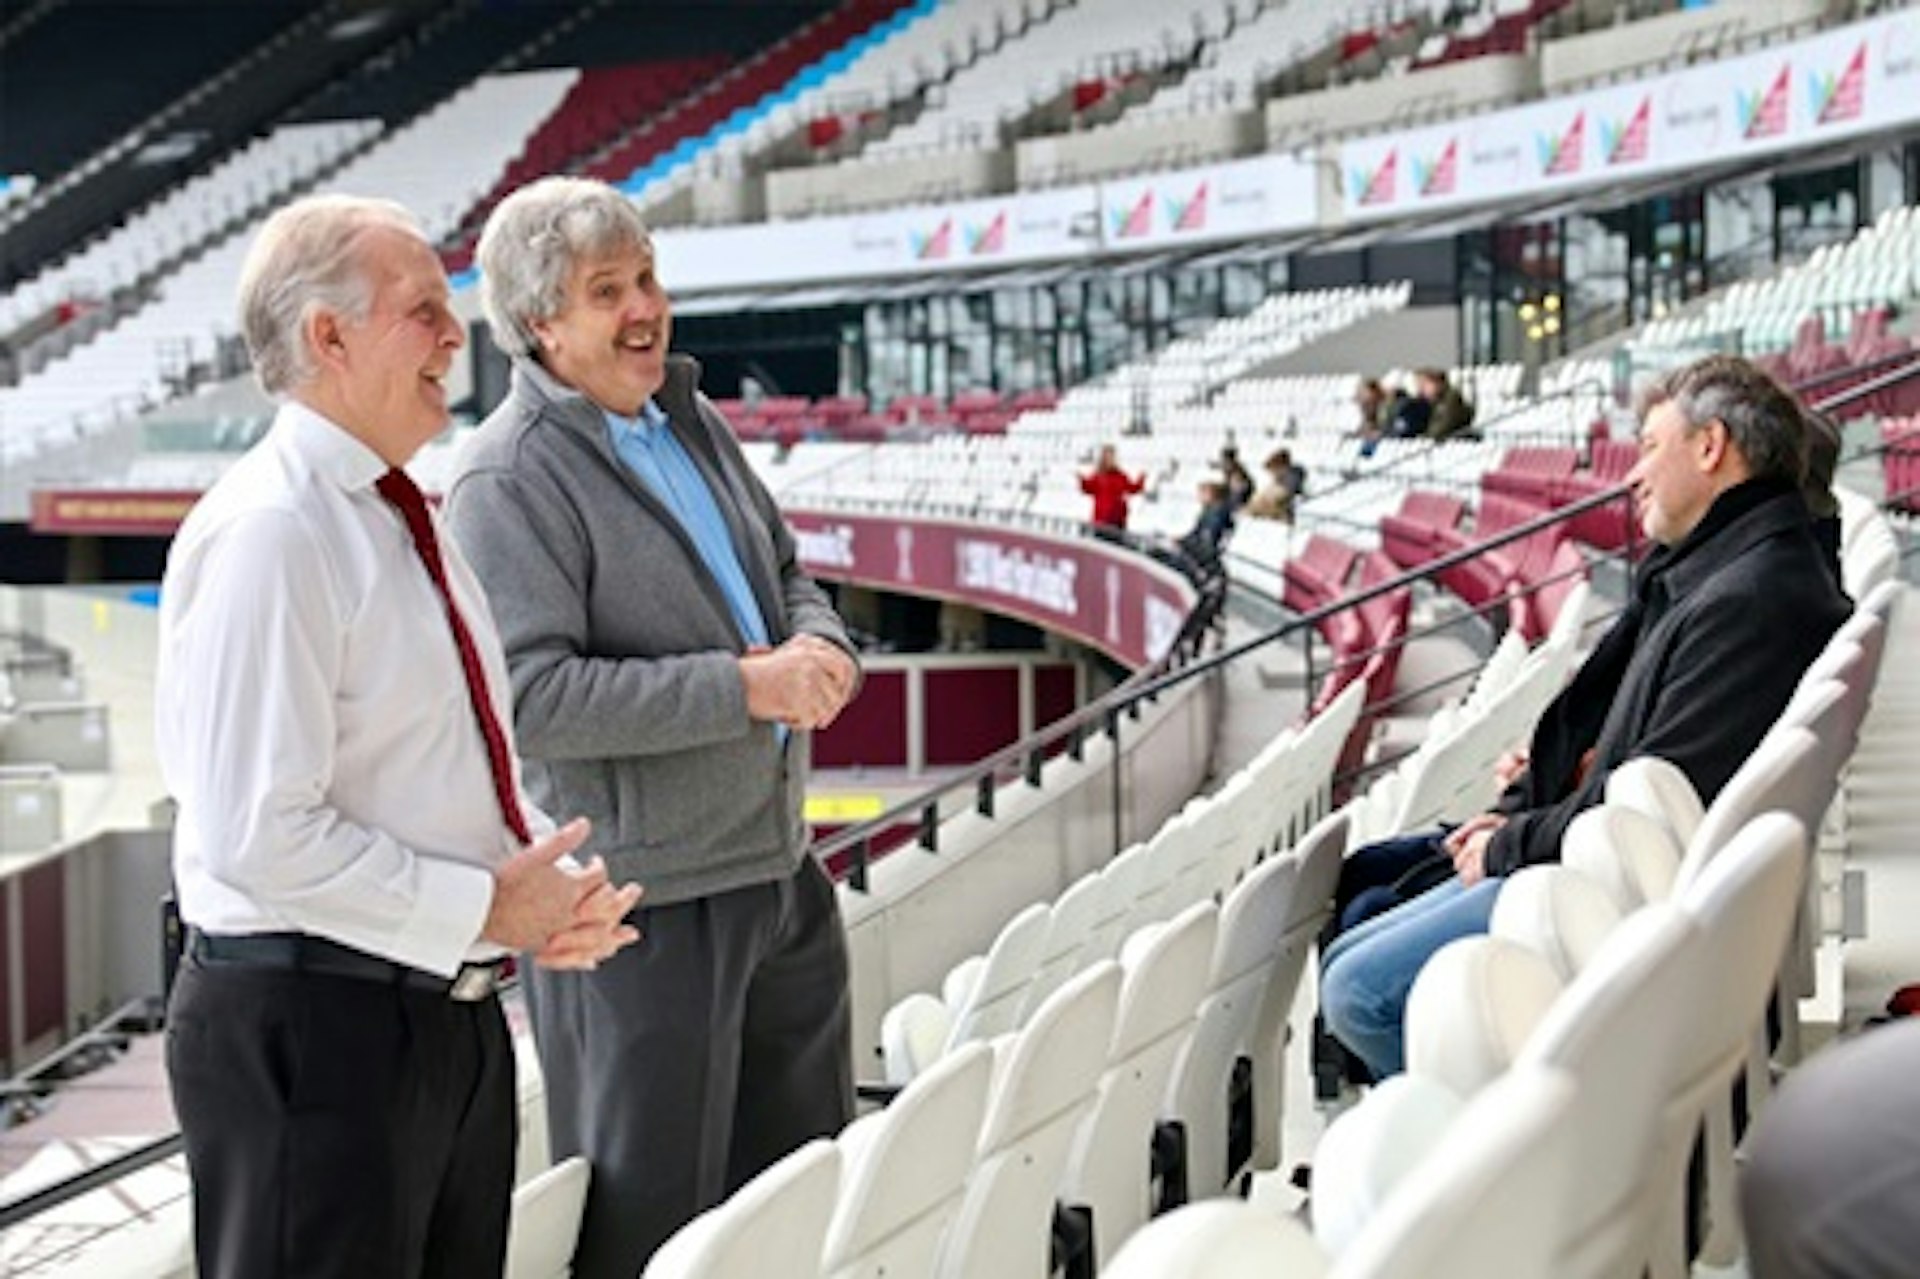 West Ham Legends Tour for One Adult and One Child at London Stadium 2